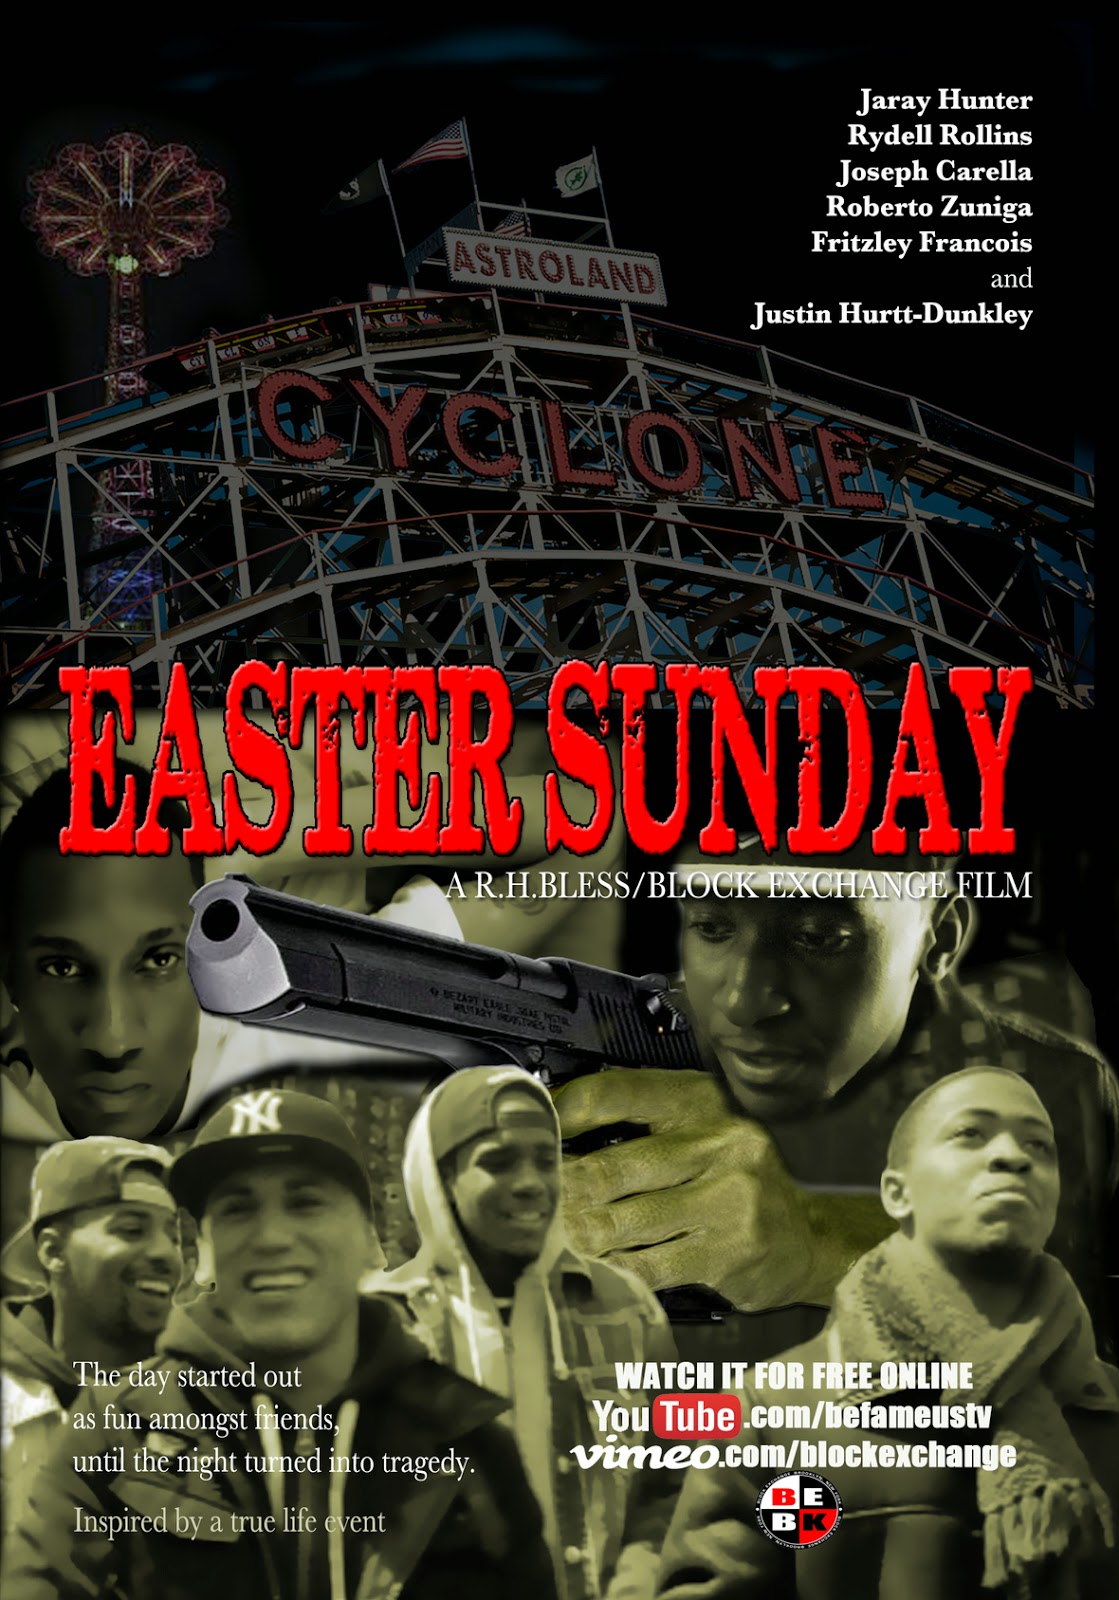 Intrigued Music Blog: Easter Sunday (The Official Movie)